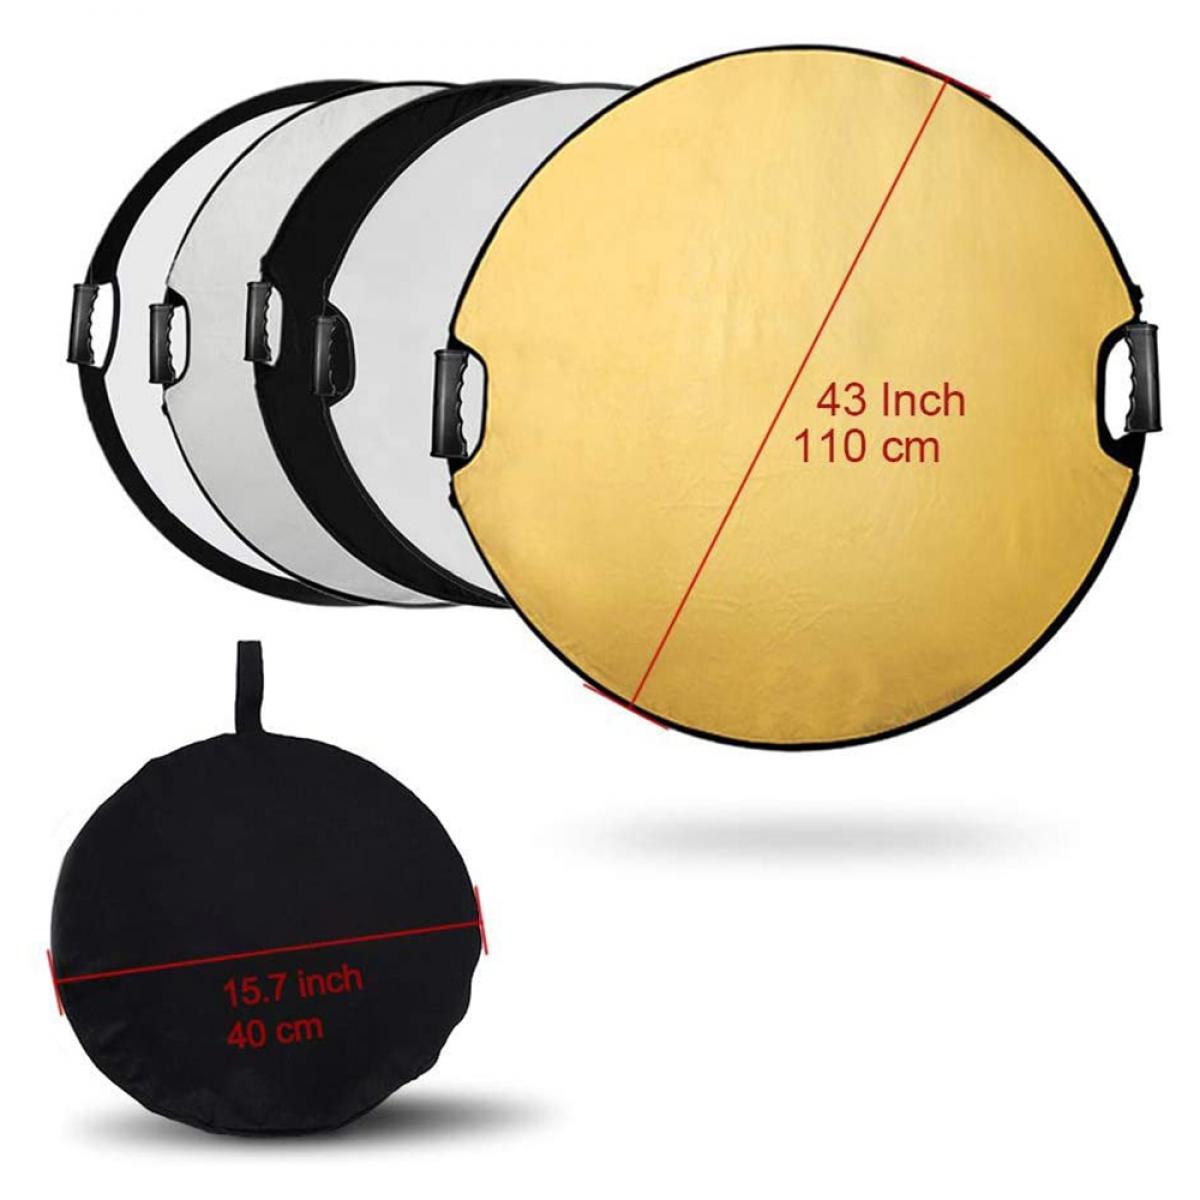 60CM Round Studio Lighting Reflector HAMON 5-in-1 Round Light Reflector with Handle and Carrying Bag 60CM Collapsible Photography Reflector Multi Disc for Studio Photography